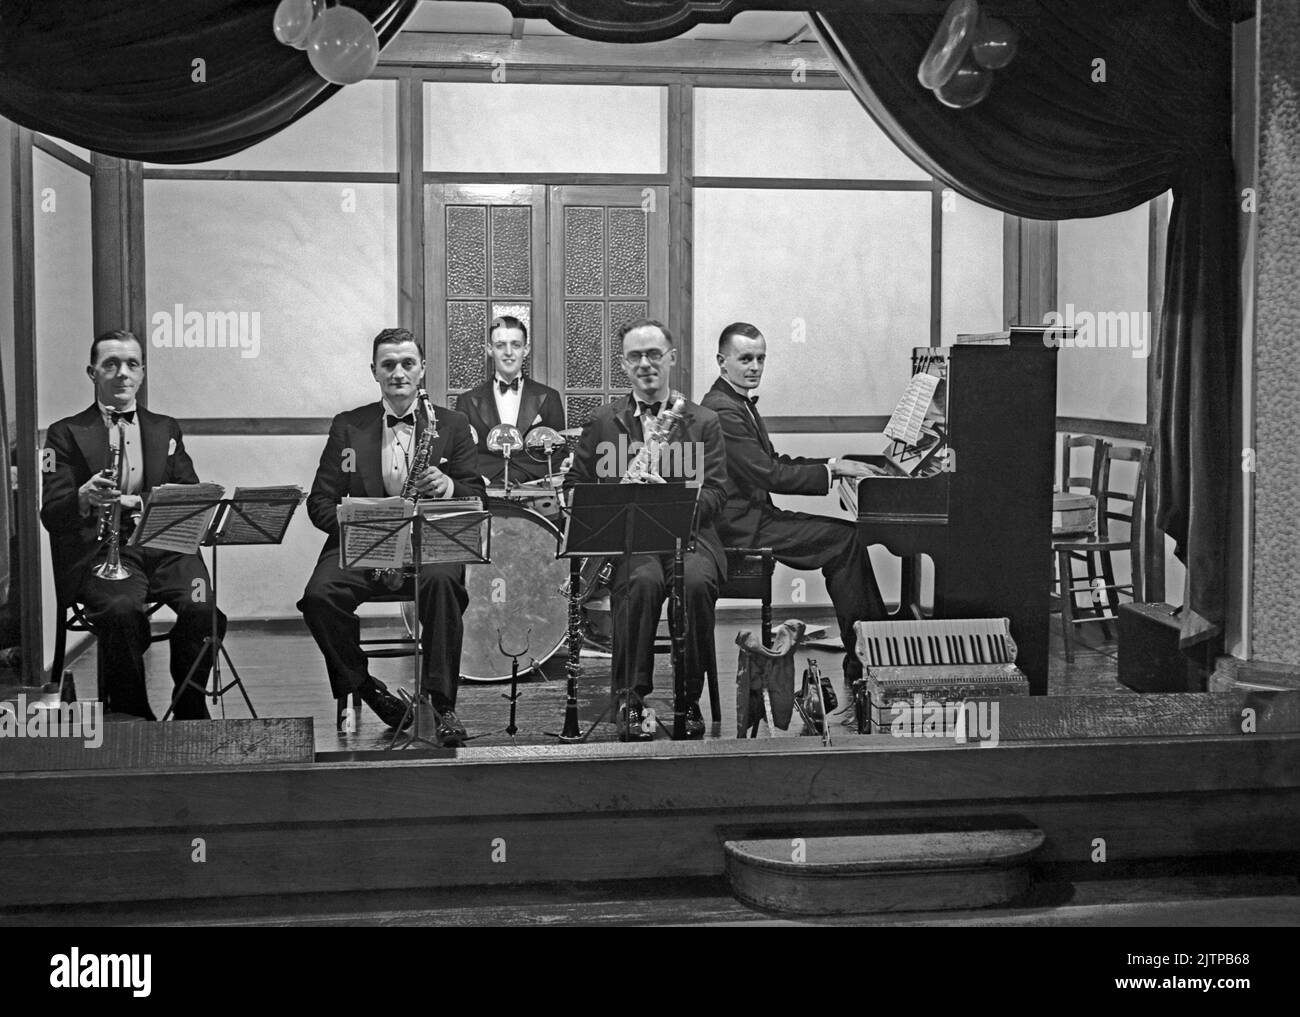 A British five-piece dance band, Jack Monks Jazz Band, onstage in Sutton, Surrey (now a borough of London), UK in December 1937. Early dance and swing bands had their heyday in the UK during the 1920s–30s. Bands played in dance halls and hotel ballrooms. They played melodic, good-time music and individual players would play in several bands. This image is from an old glass negative – a vintage 1930s photograph. Stock Photo